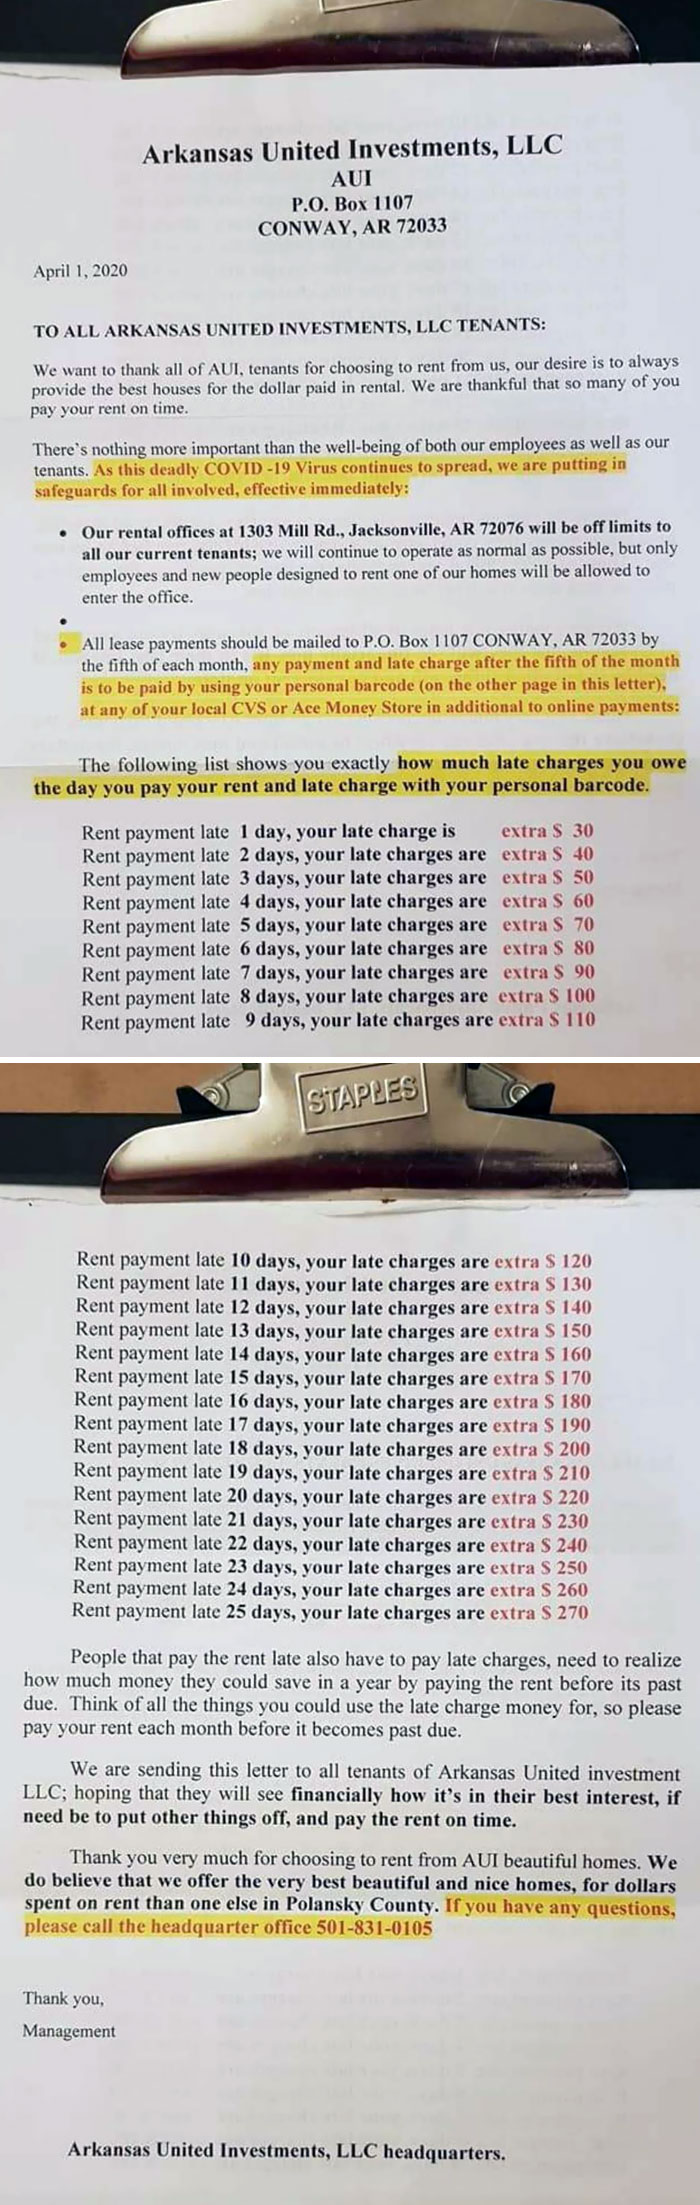 Nope, This Wasn't An April Fool's Joke. Landlord's Still Charging Late Fees, Spelled The County Name And Several Other Words Wrong, And Is Even Asking For People To Pay Rent In Advance To "Save Money"